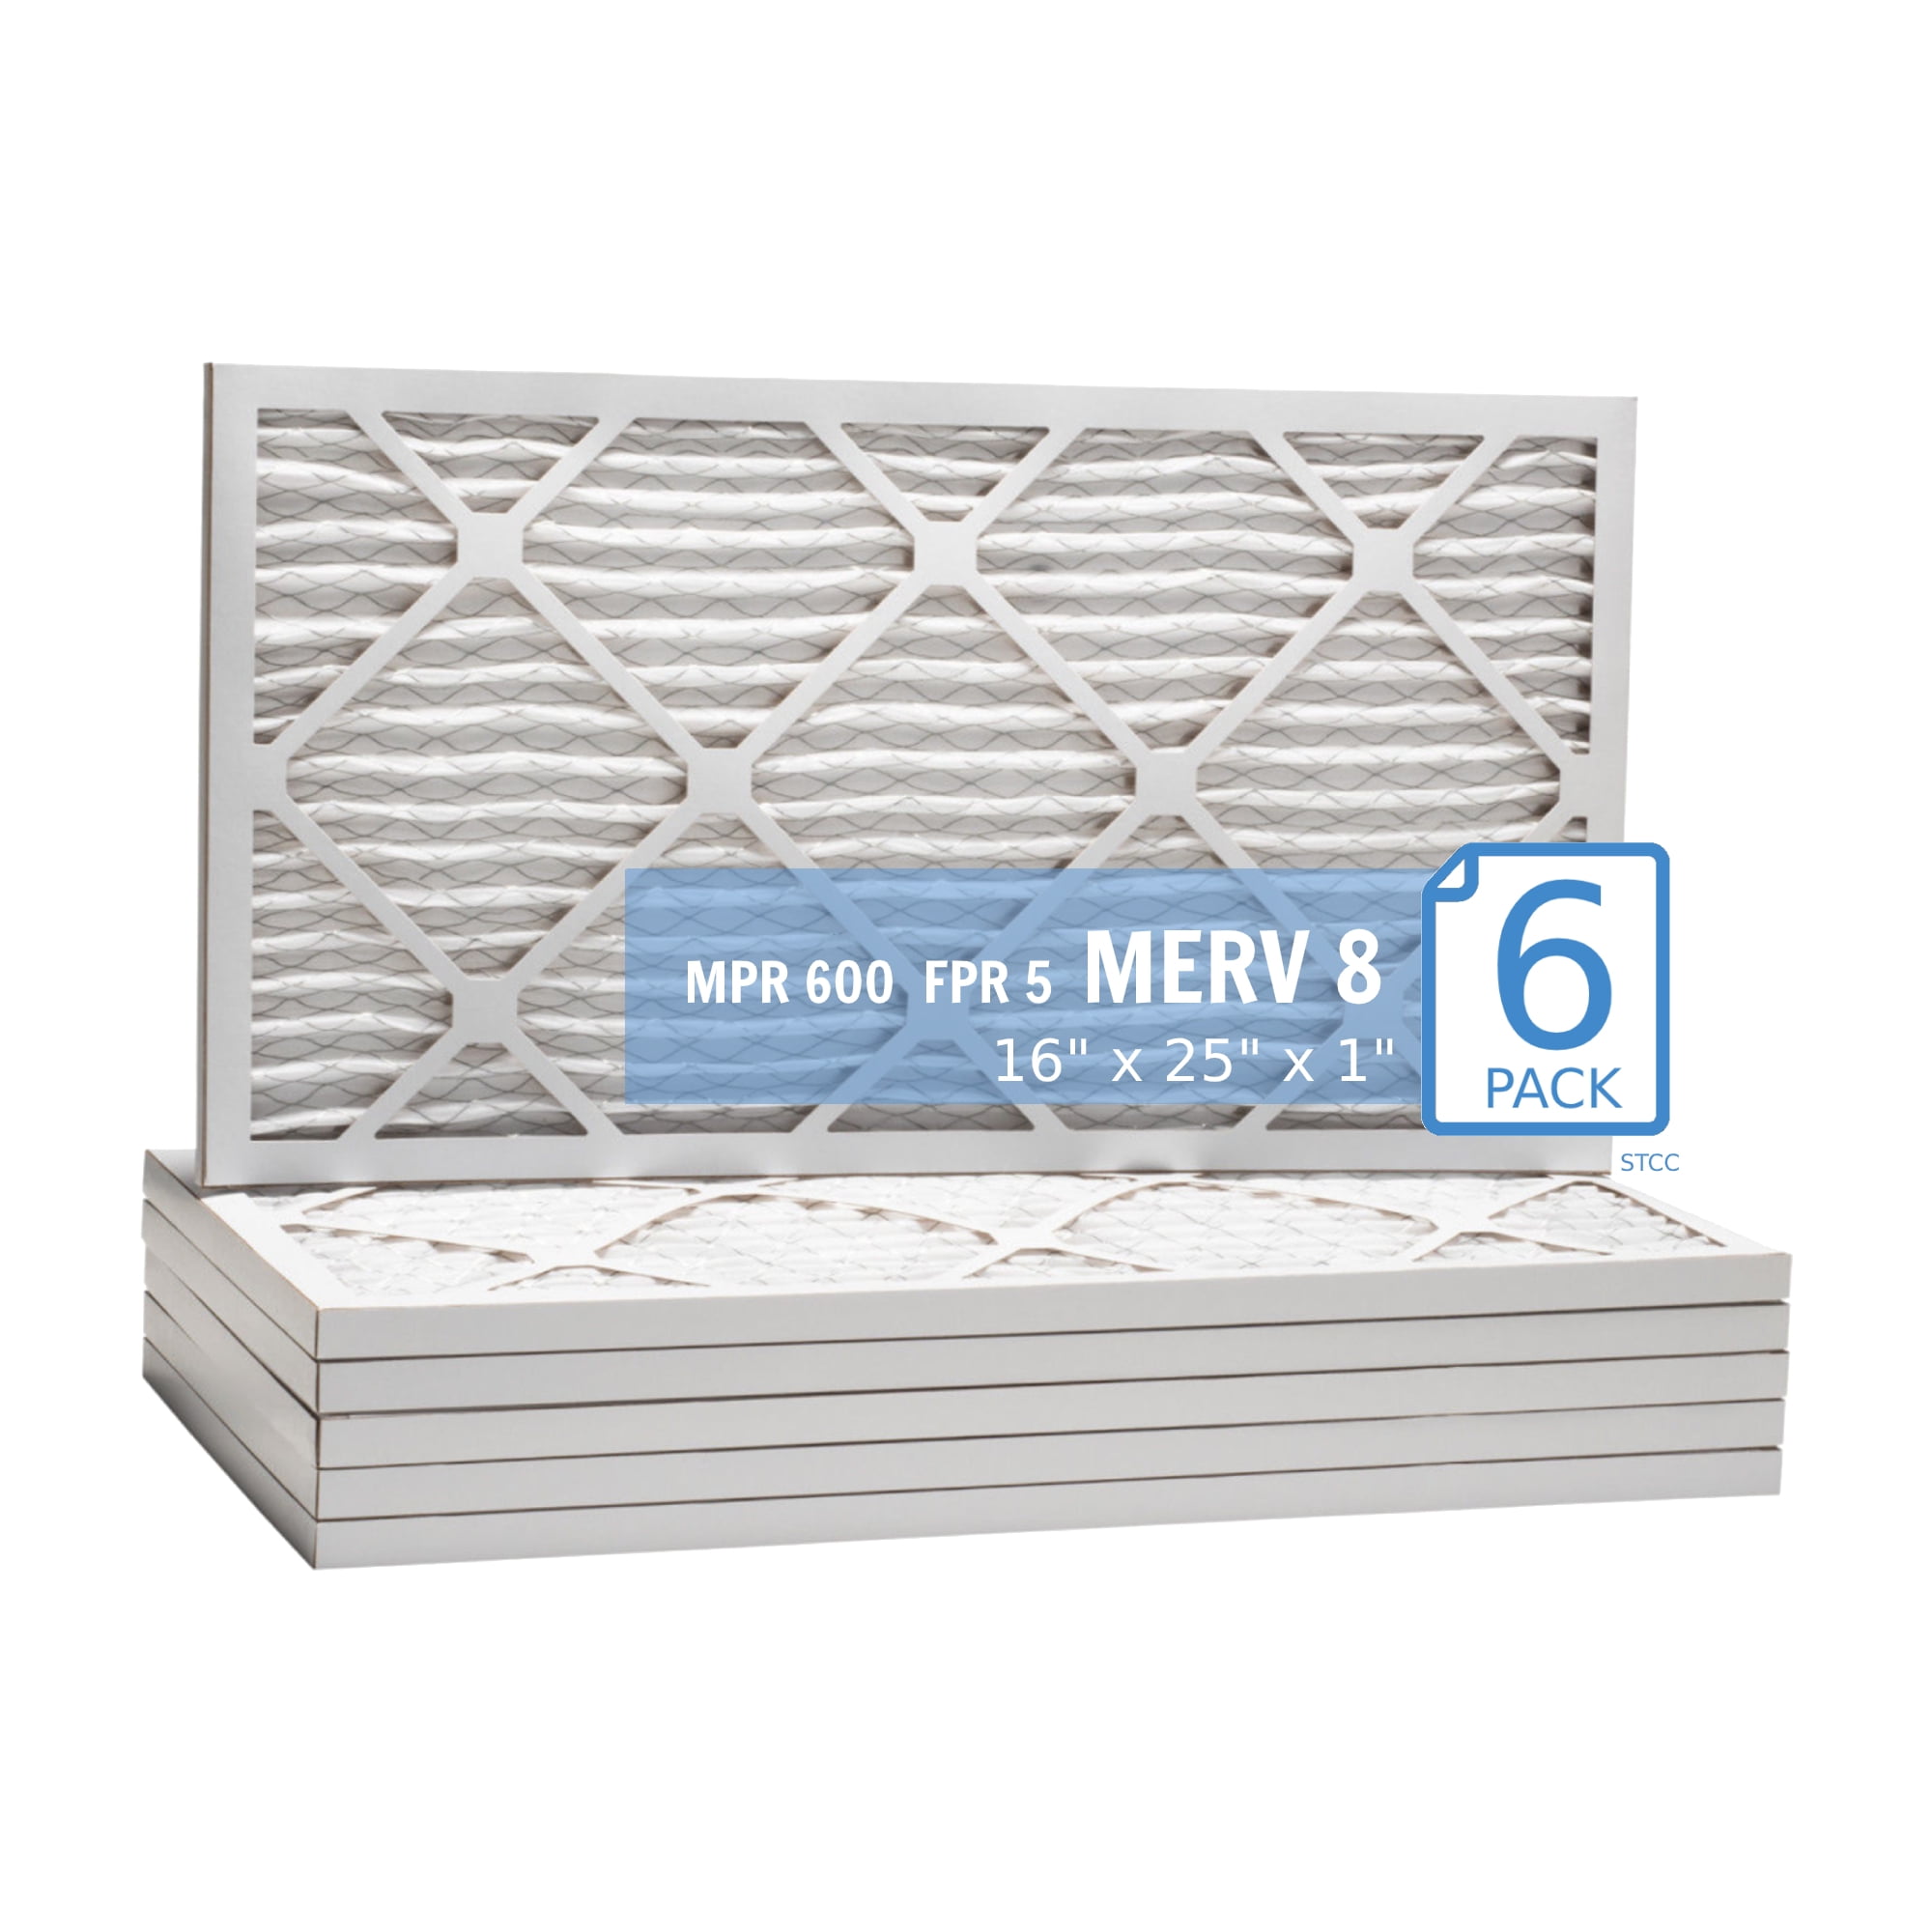 Mechanical MERV 8 18 W x 20 H x 1 D 18 W x 20 H x 1 D Pack of 2 Sterling Seal KP-5251023609x2 Purolator Key Pleat Extended Surface Pleated Air Filter Pack of 2